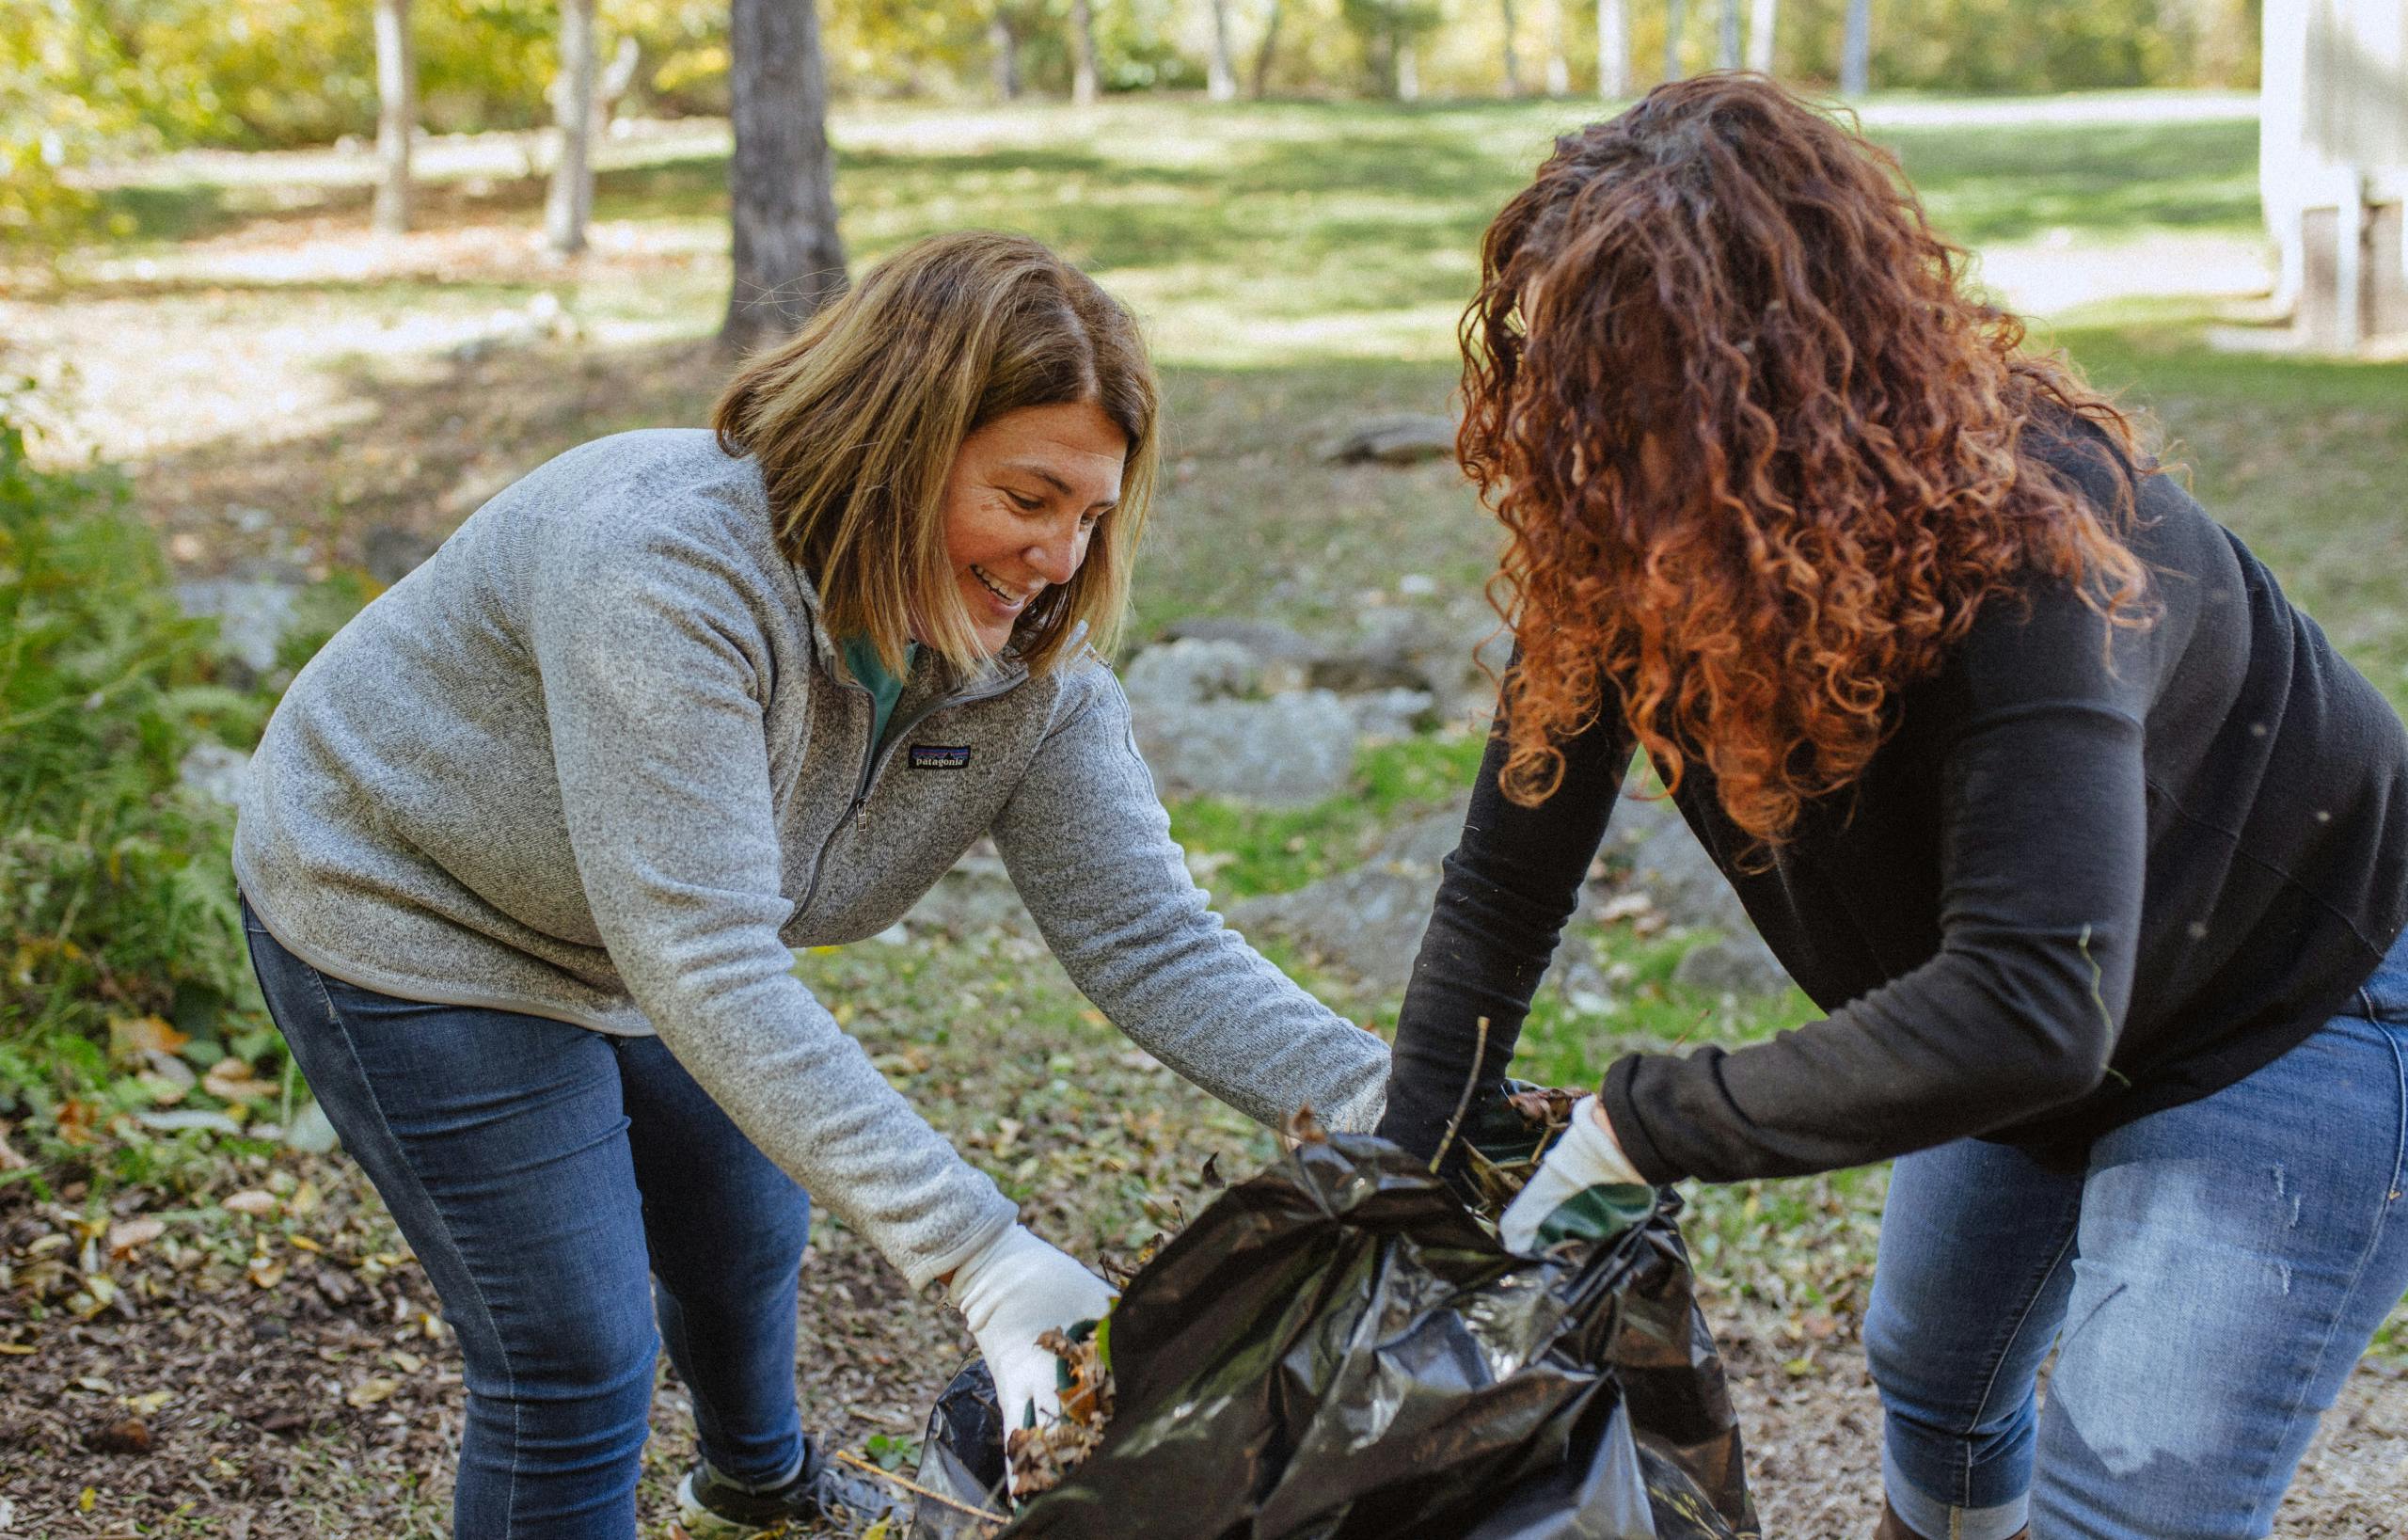 Image of two women gathering fall leaves in a trash bag together.